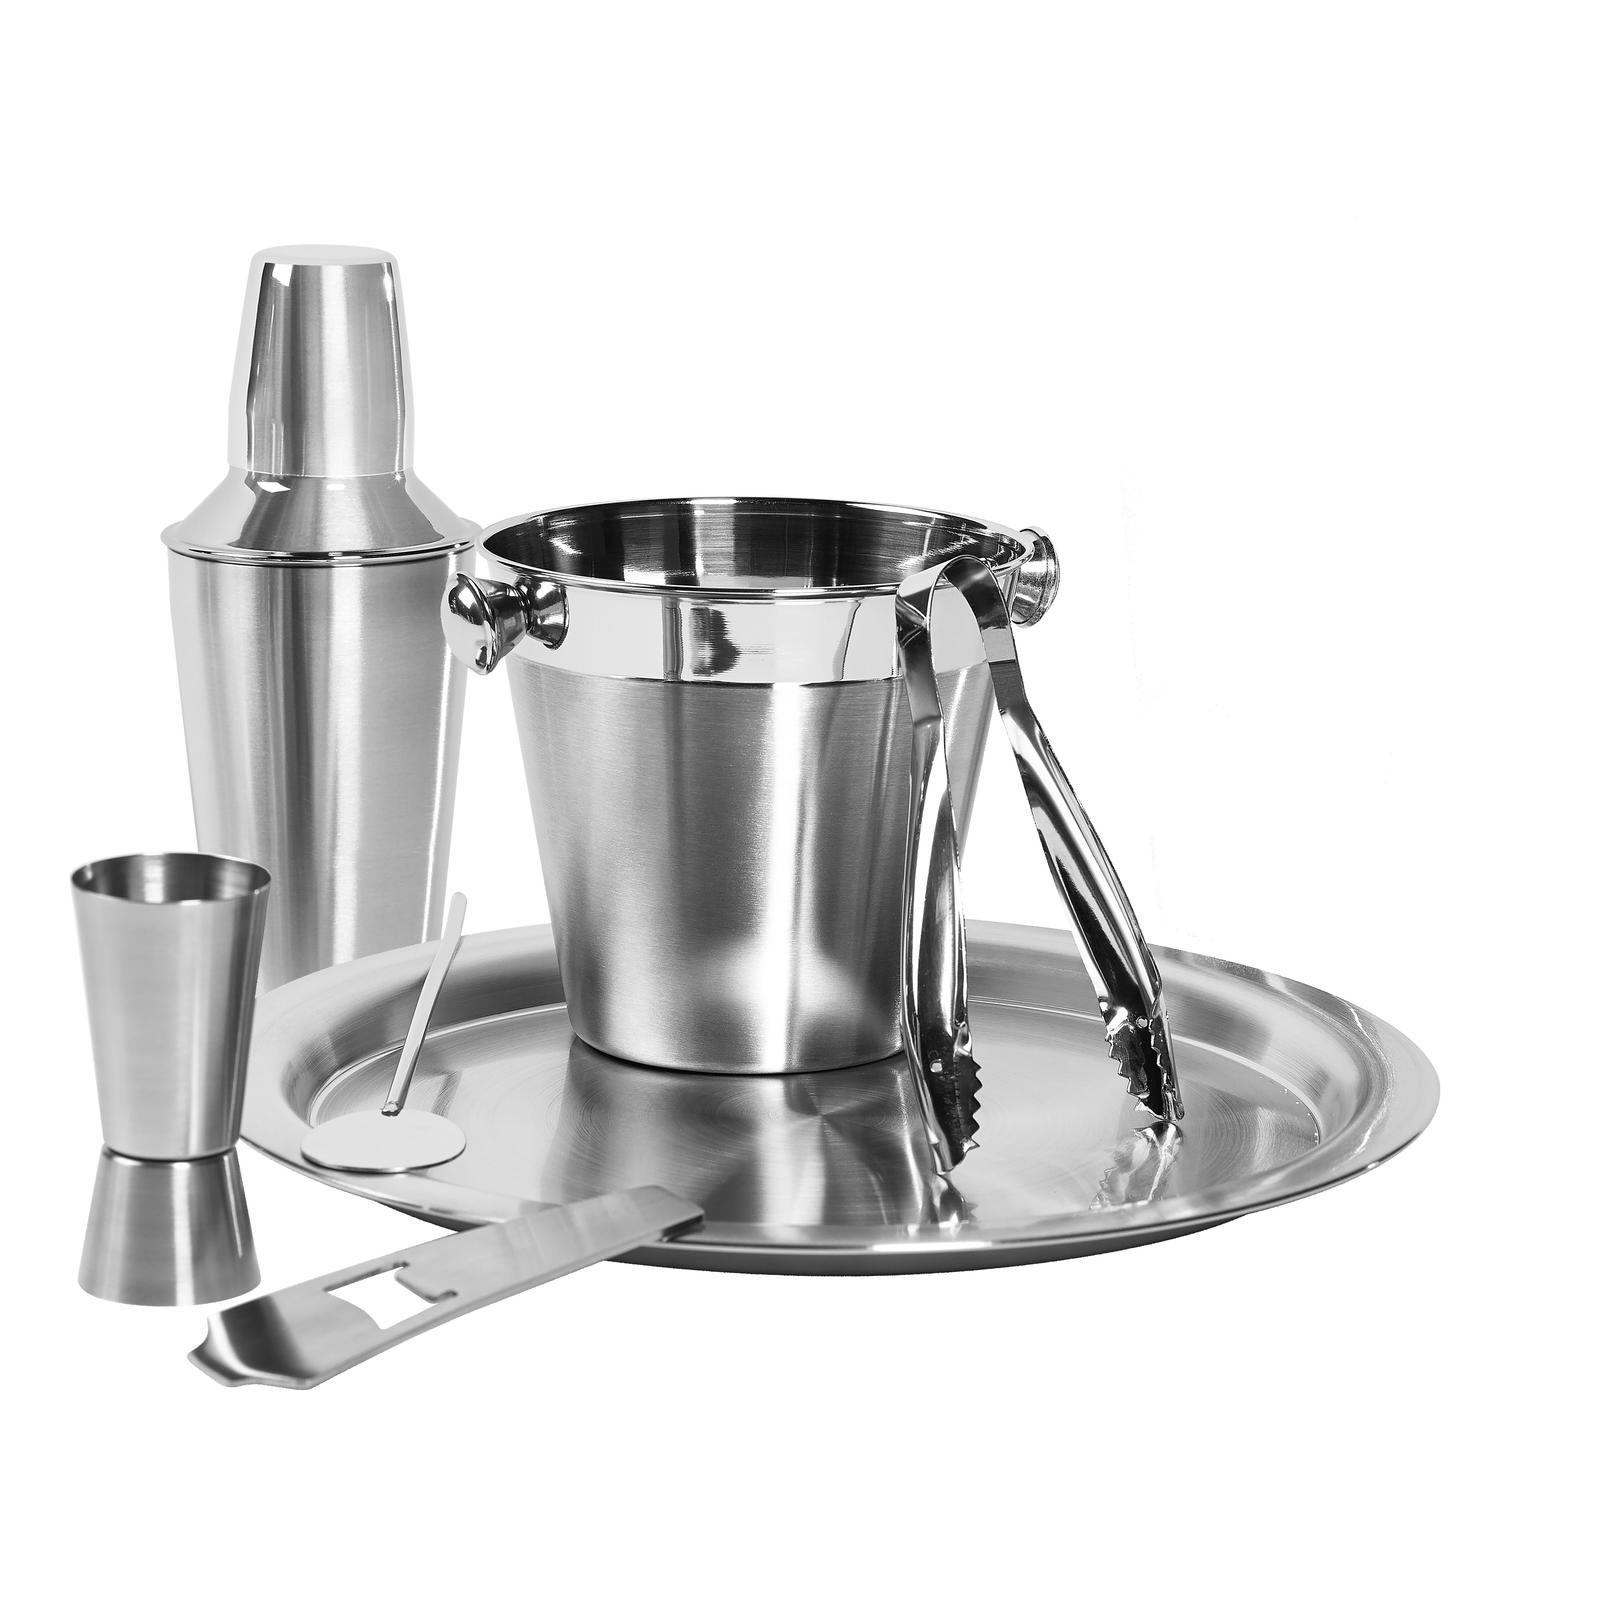 Tabletops Unlimited, Inc 7 PC Stainless Steel Part Set